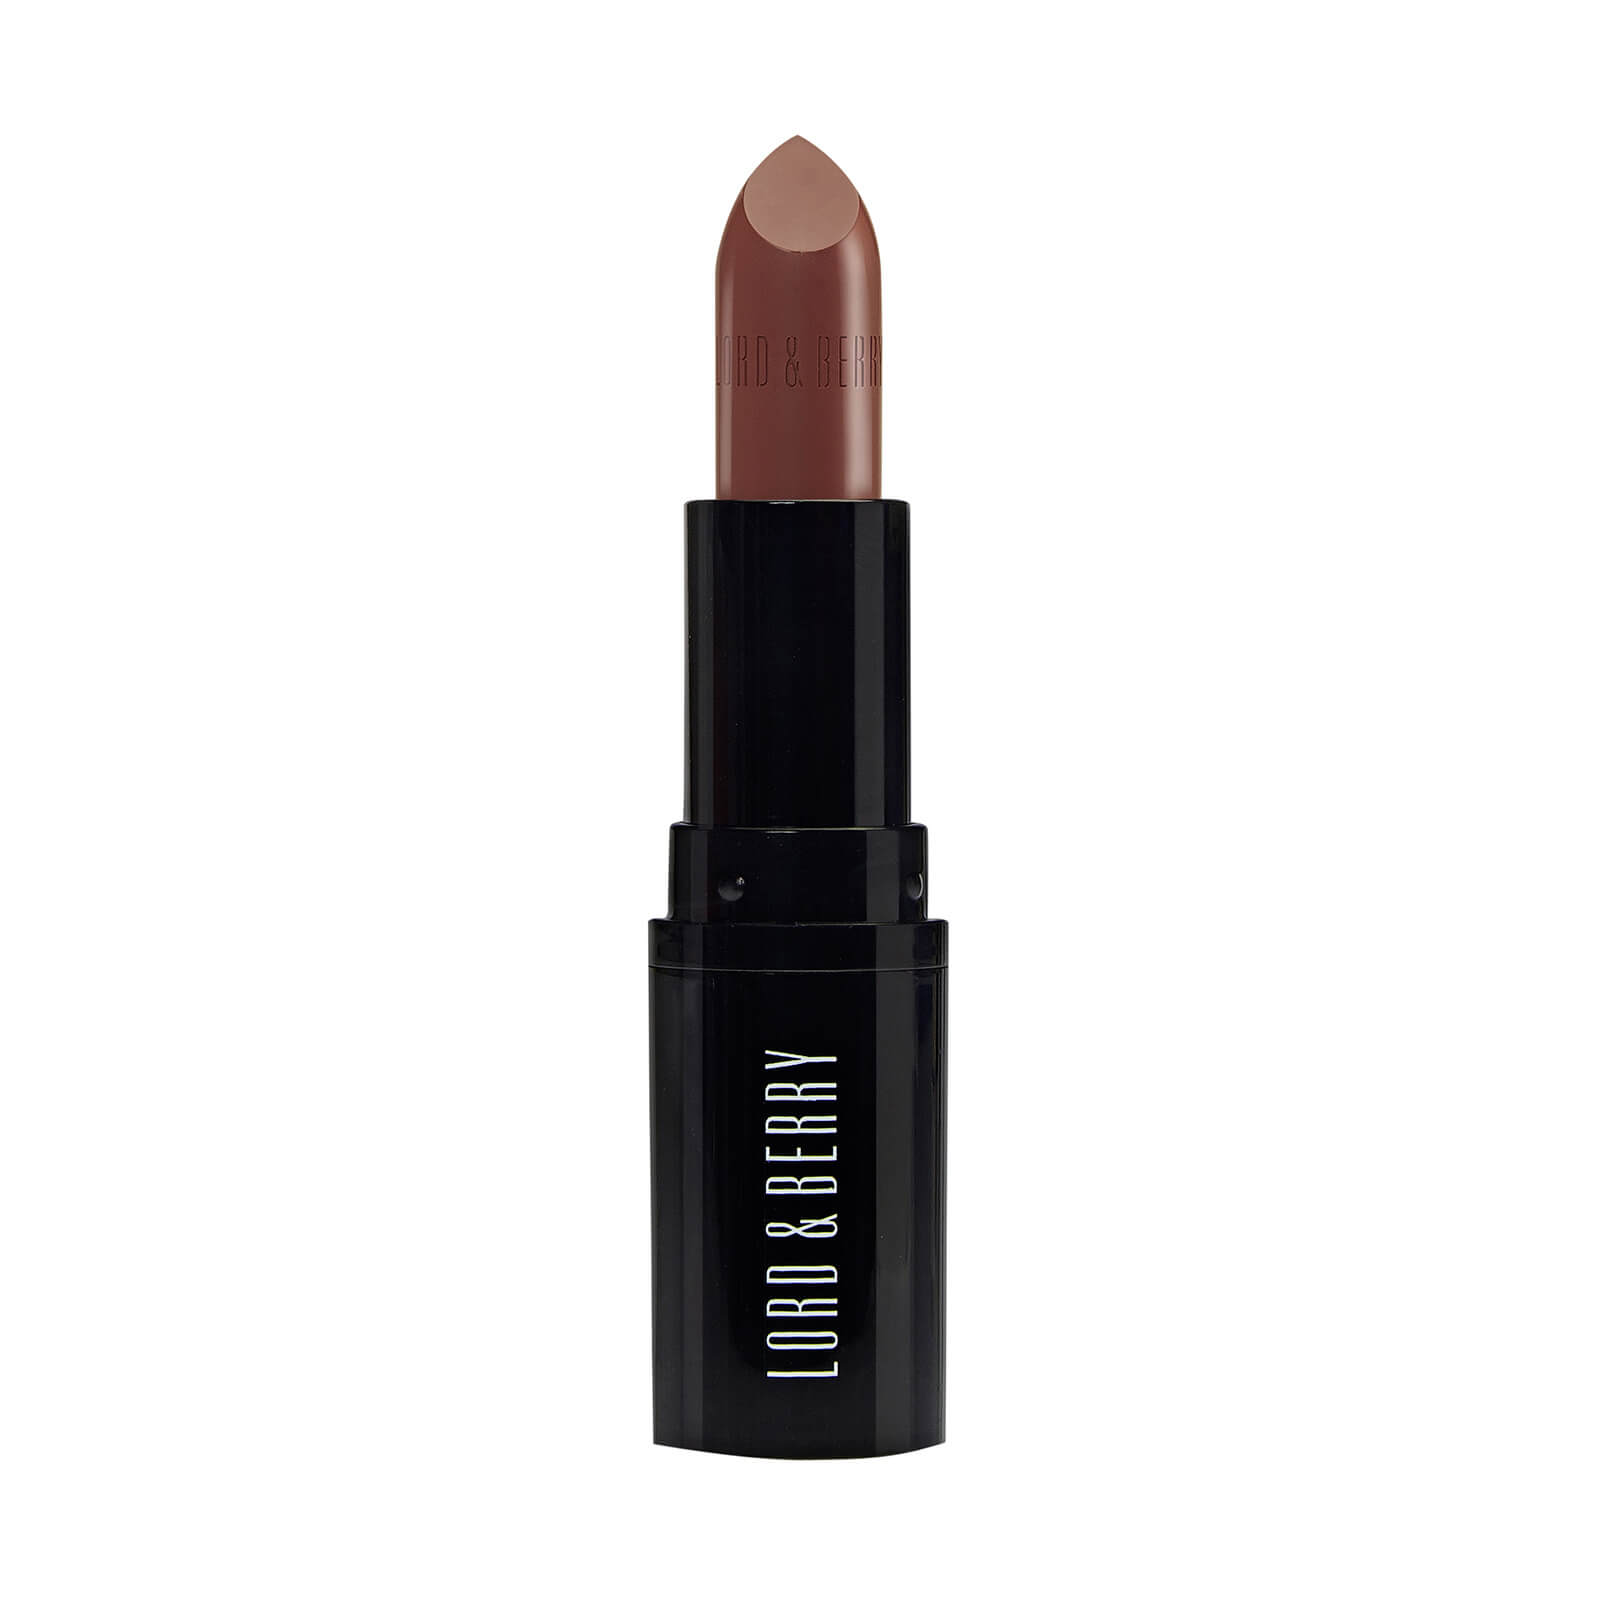 Image of Lord & Berry Absolute Lipstick 23g (Various Shades) - Haute Nude